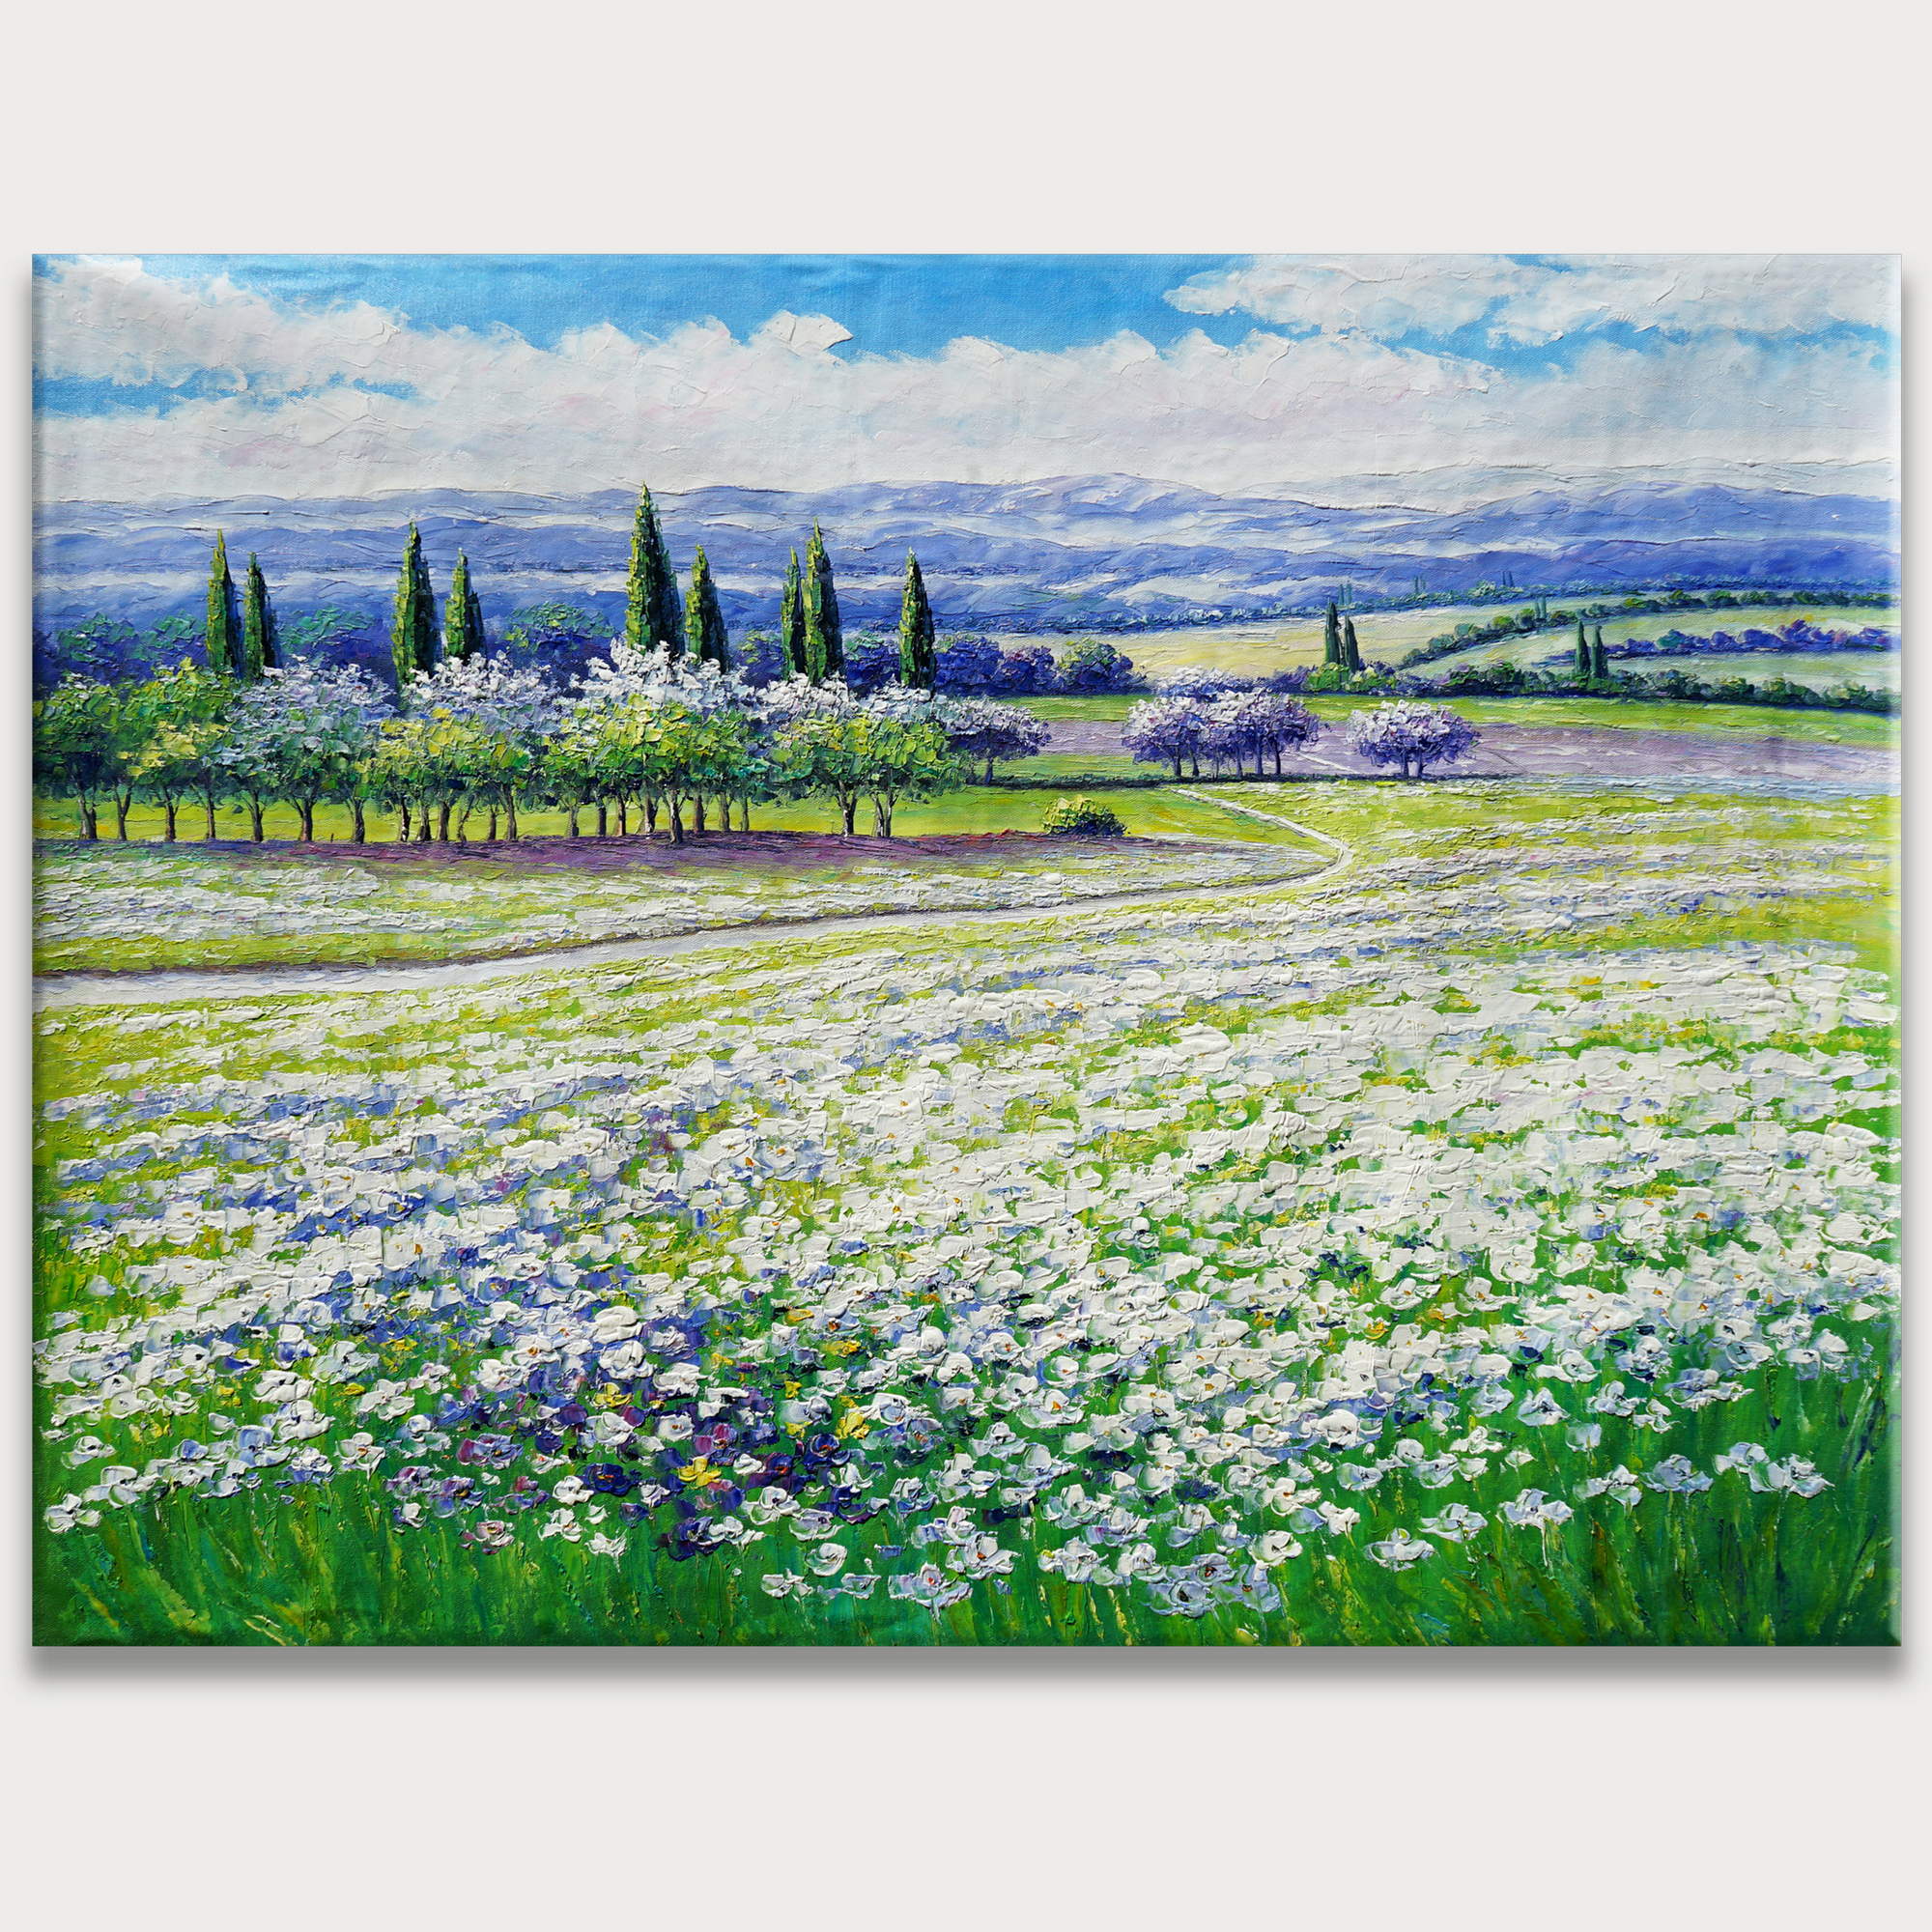 Hand painted Tuscan hills with daisies in bloom 75x100cm